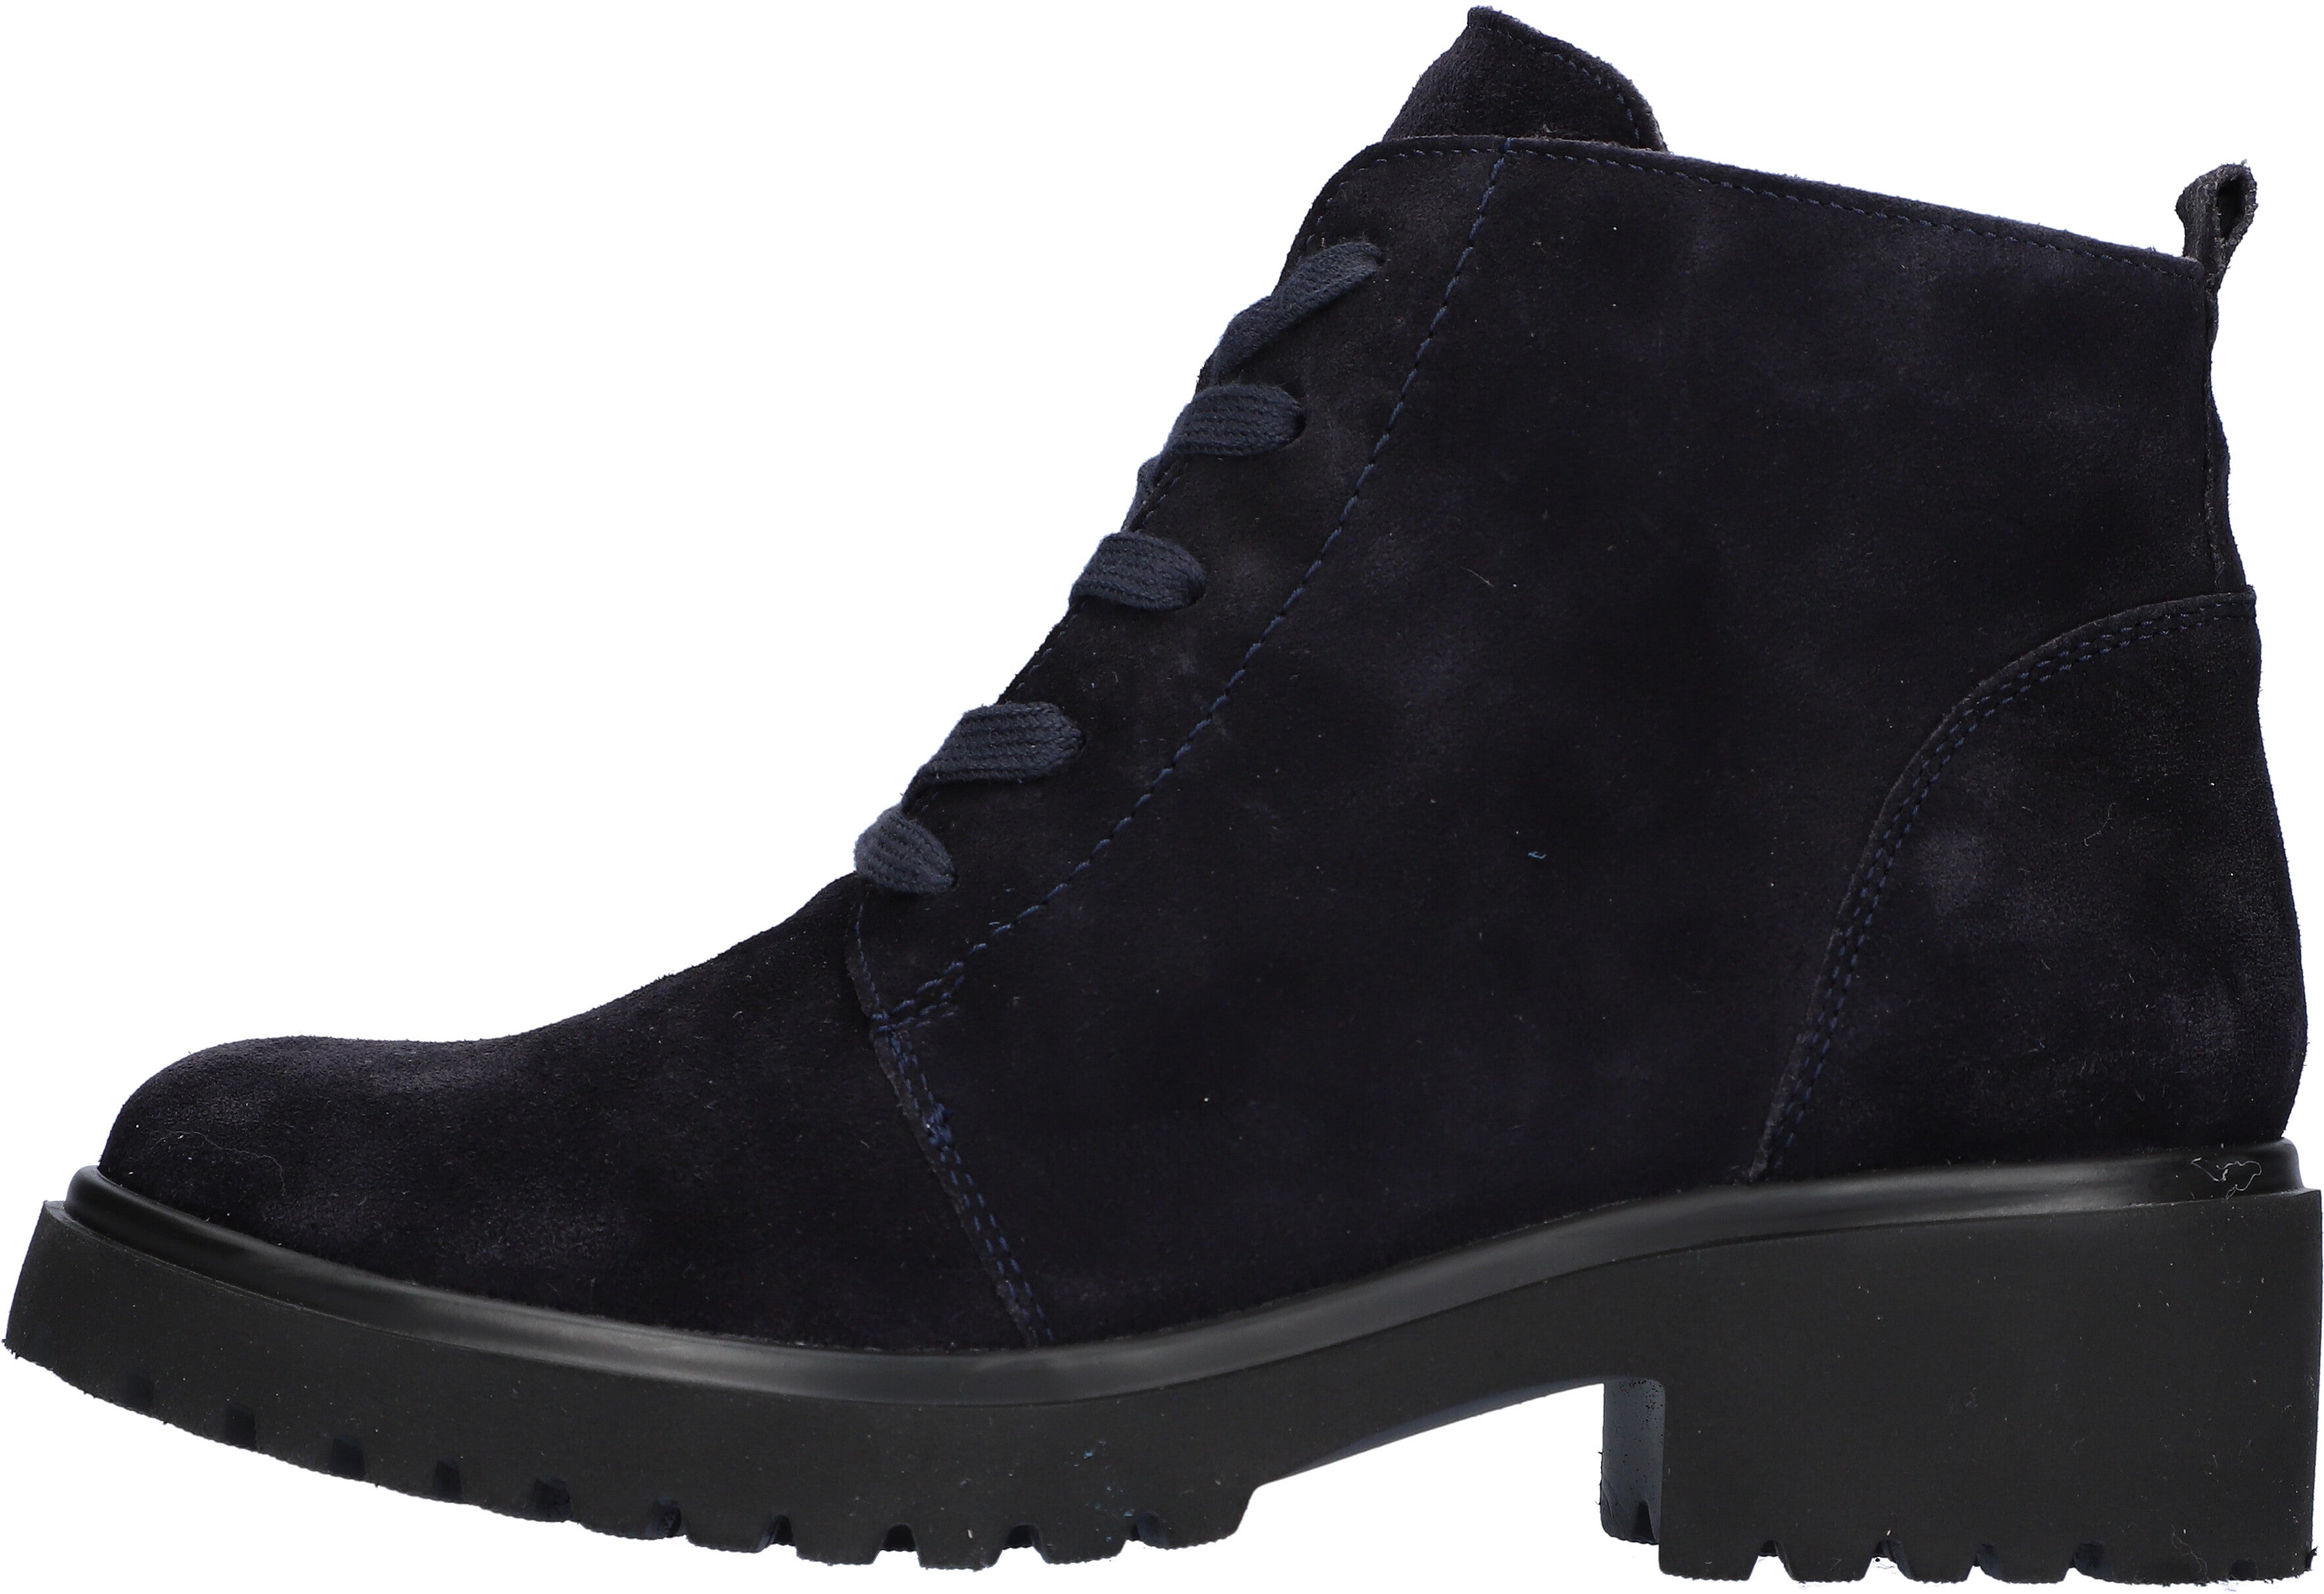 Waldlaufer 716807 195 194 H-Luise  Ladies Navy Blue Suede Arch Support Zip & Lace Ankle Boots